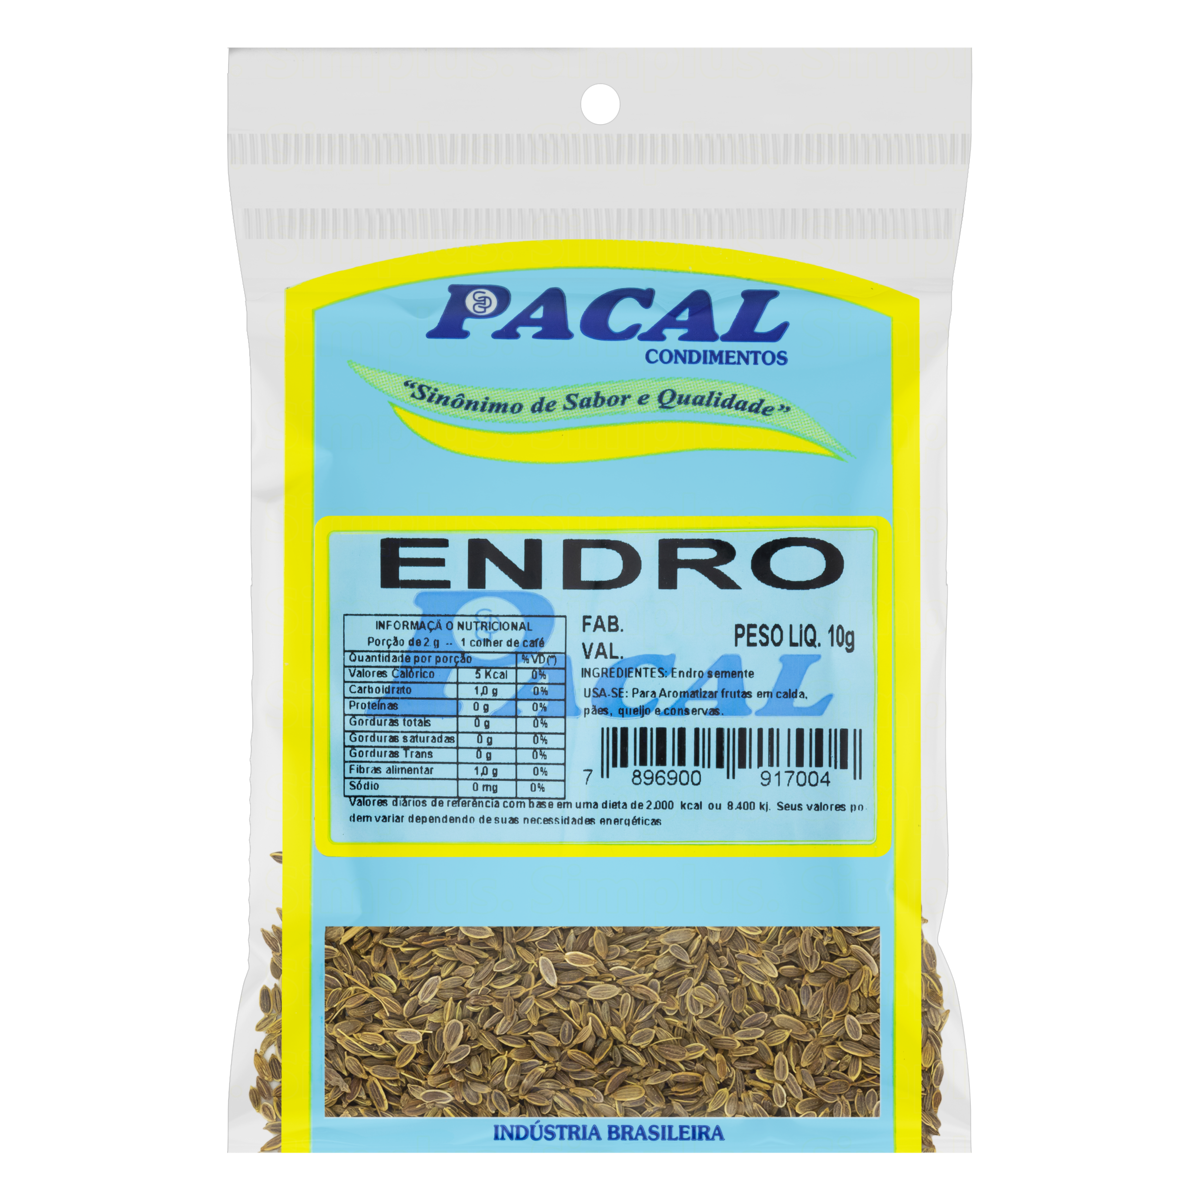 7896900917004 - ENDRO PACAL PACOTE 10G